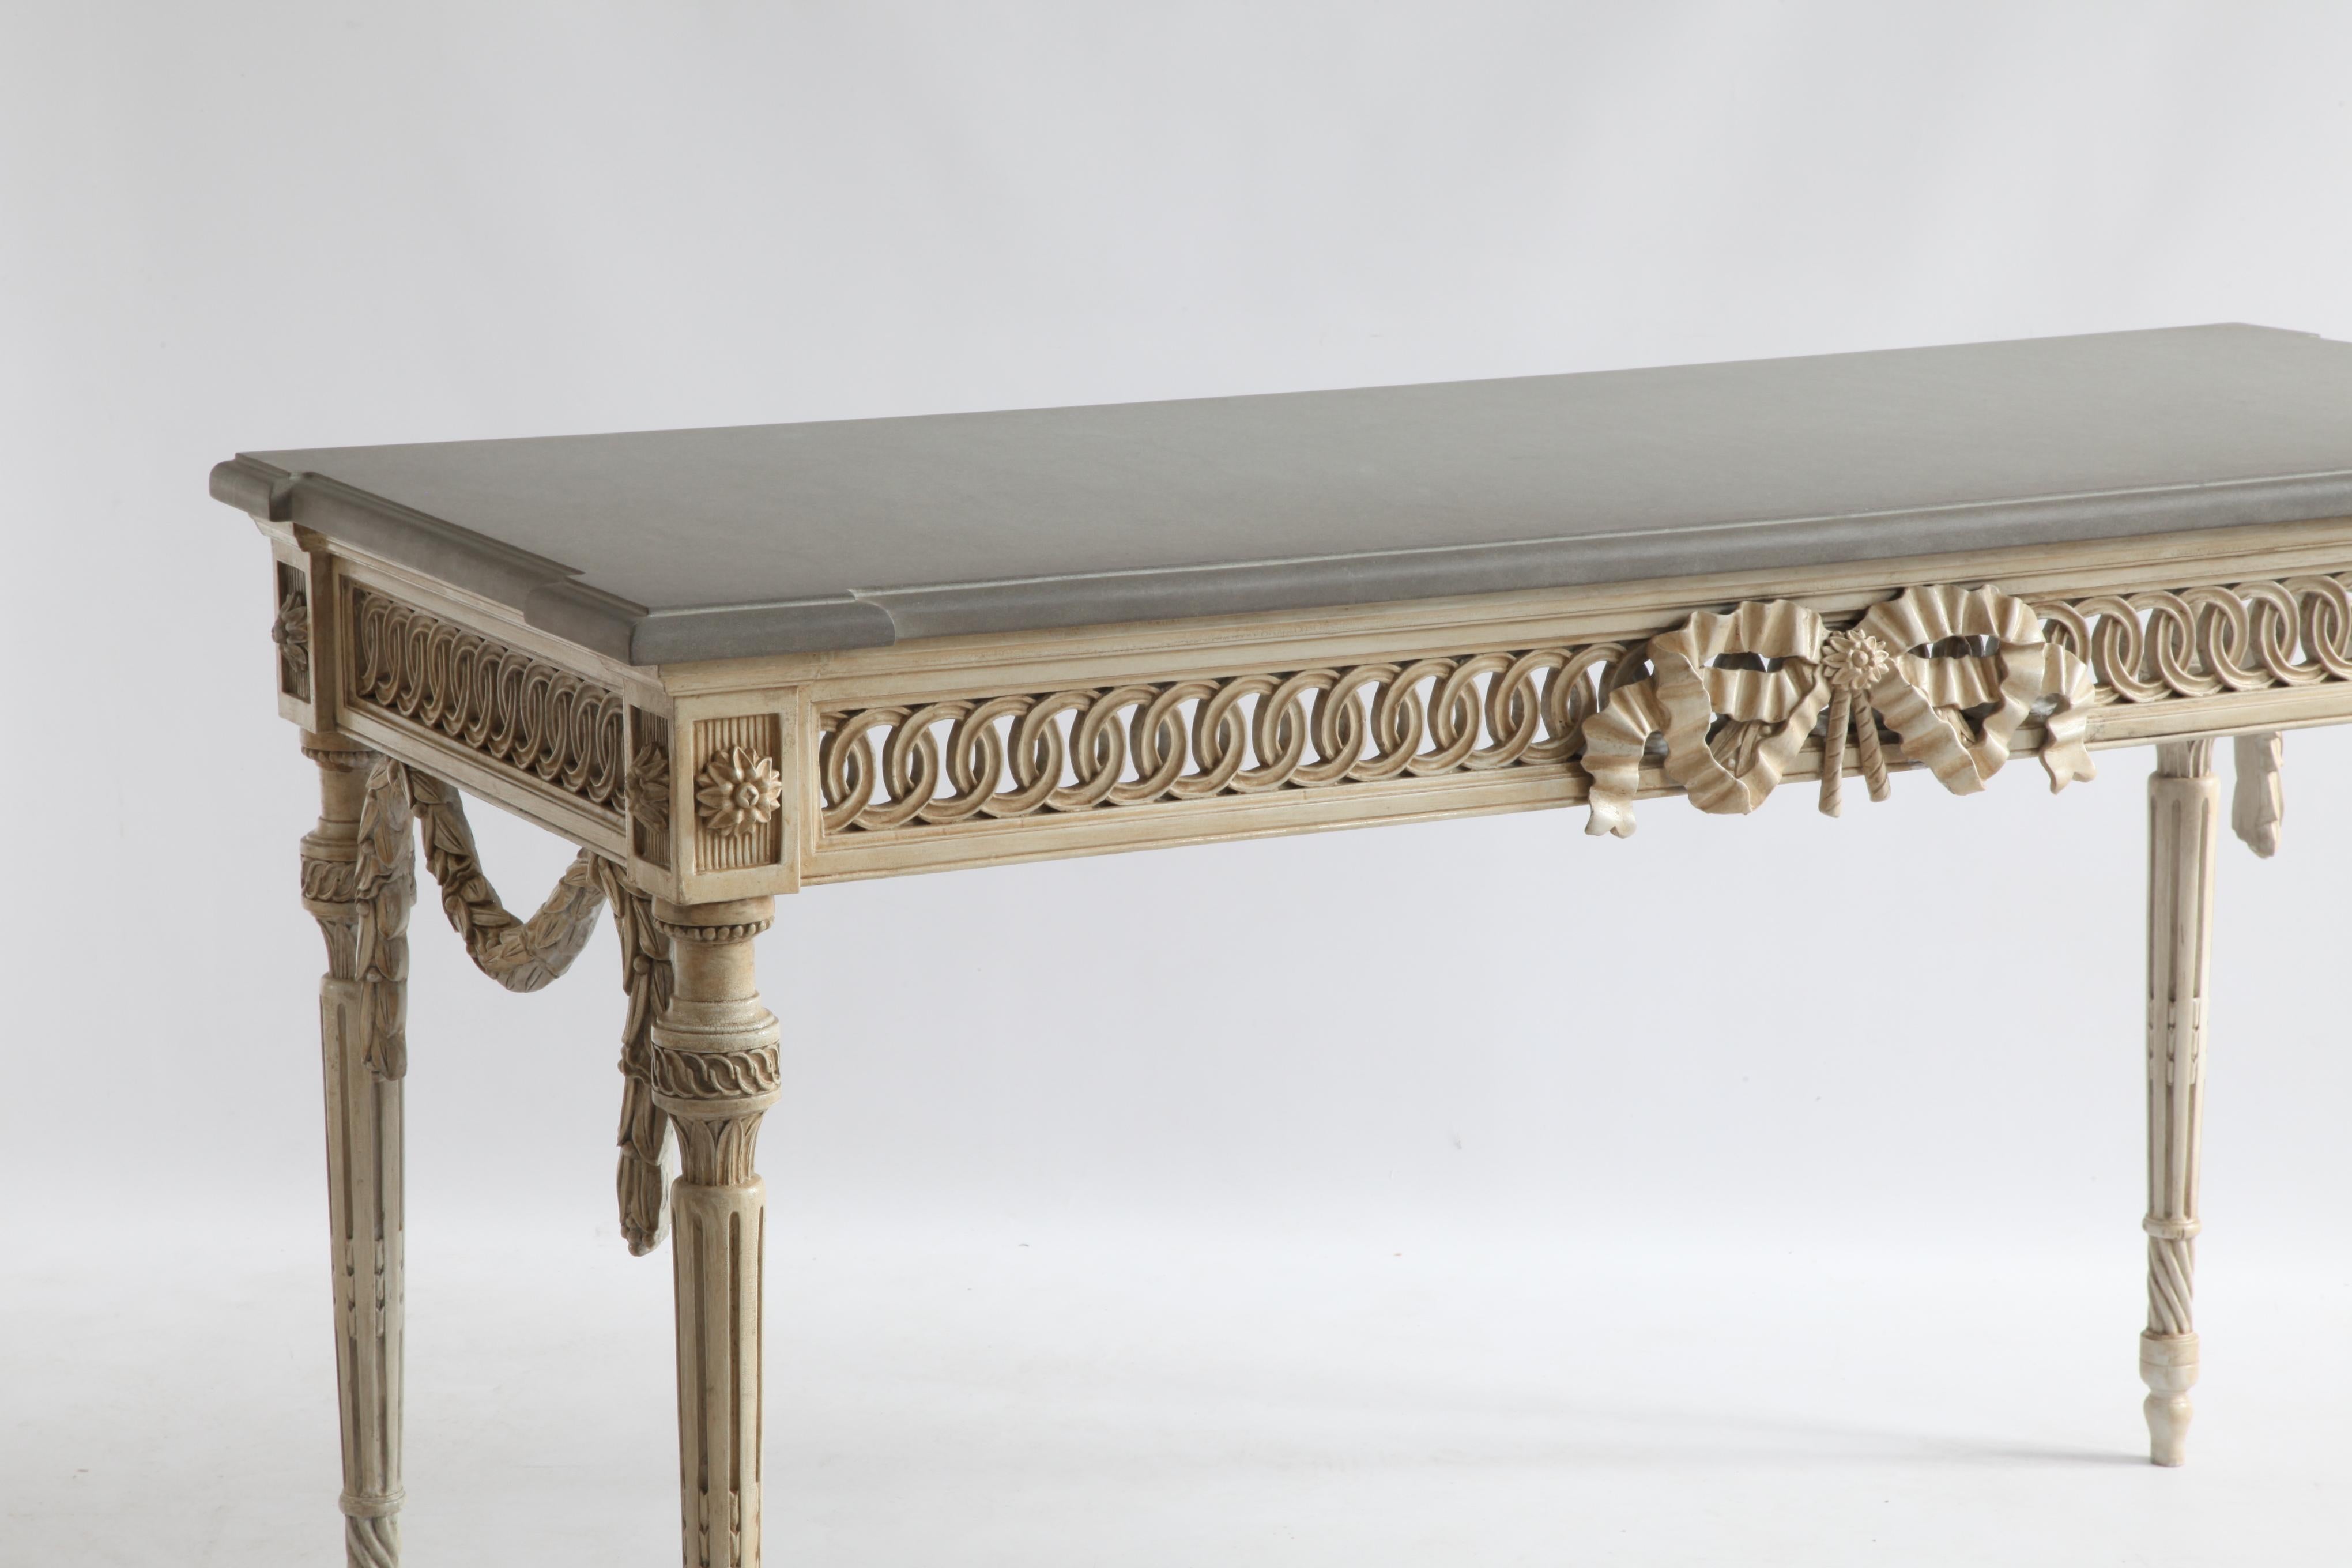 Louis XVI Style Console Table Hand Carved in Wood and Finished in French Grey In Good Condition For Sale In London, Park Royal